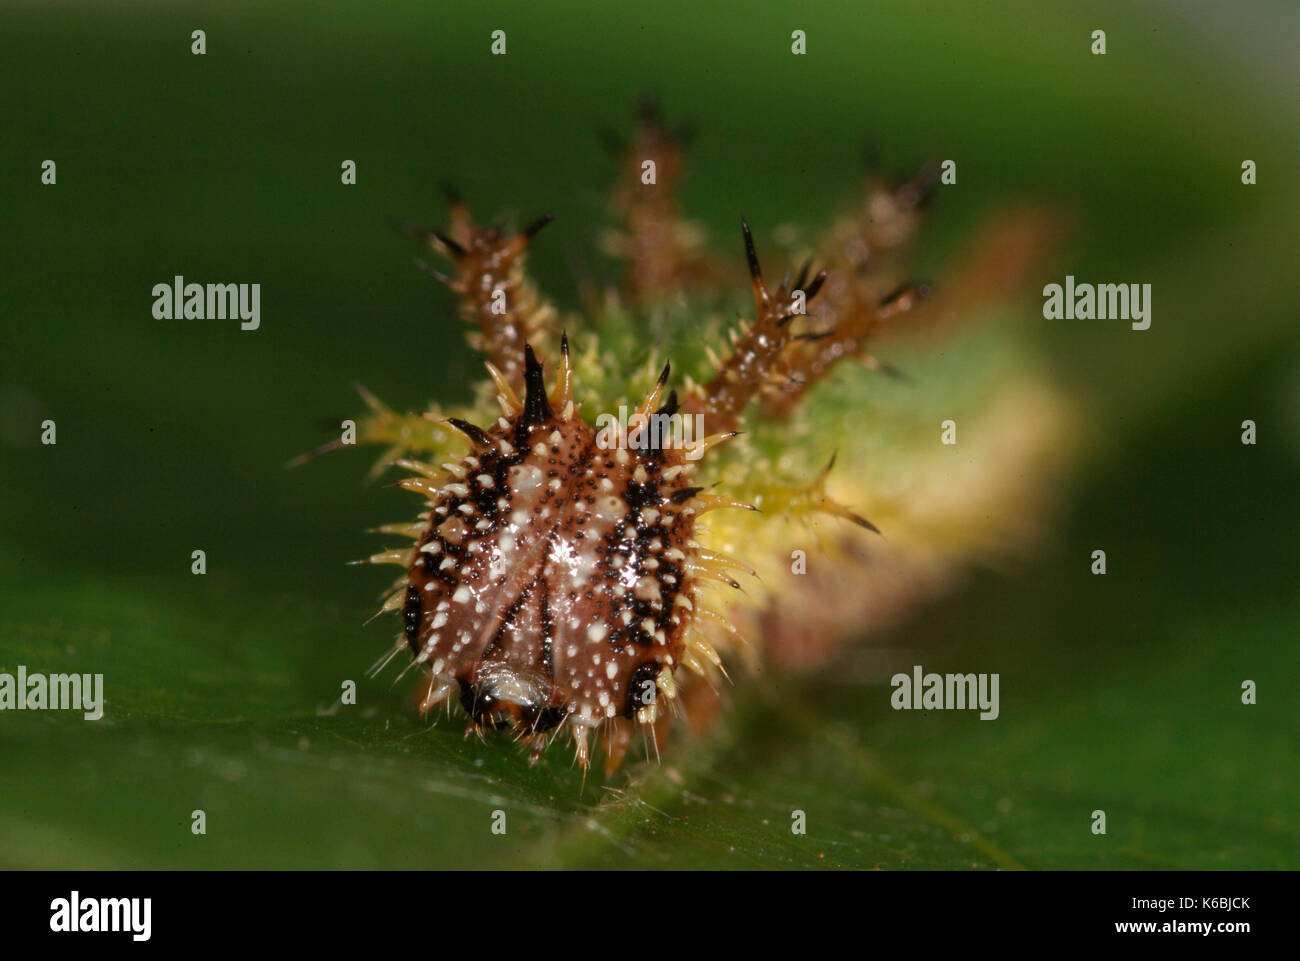 White Admiral Butterfly Caterpillar, Larvae, Ladoga camilla, close up of head, showing spines, spiny, feeds on honeysuckle, foodplant, green, hairy, f Stock Photo